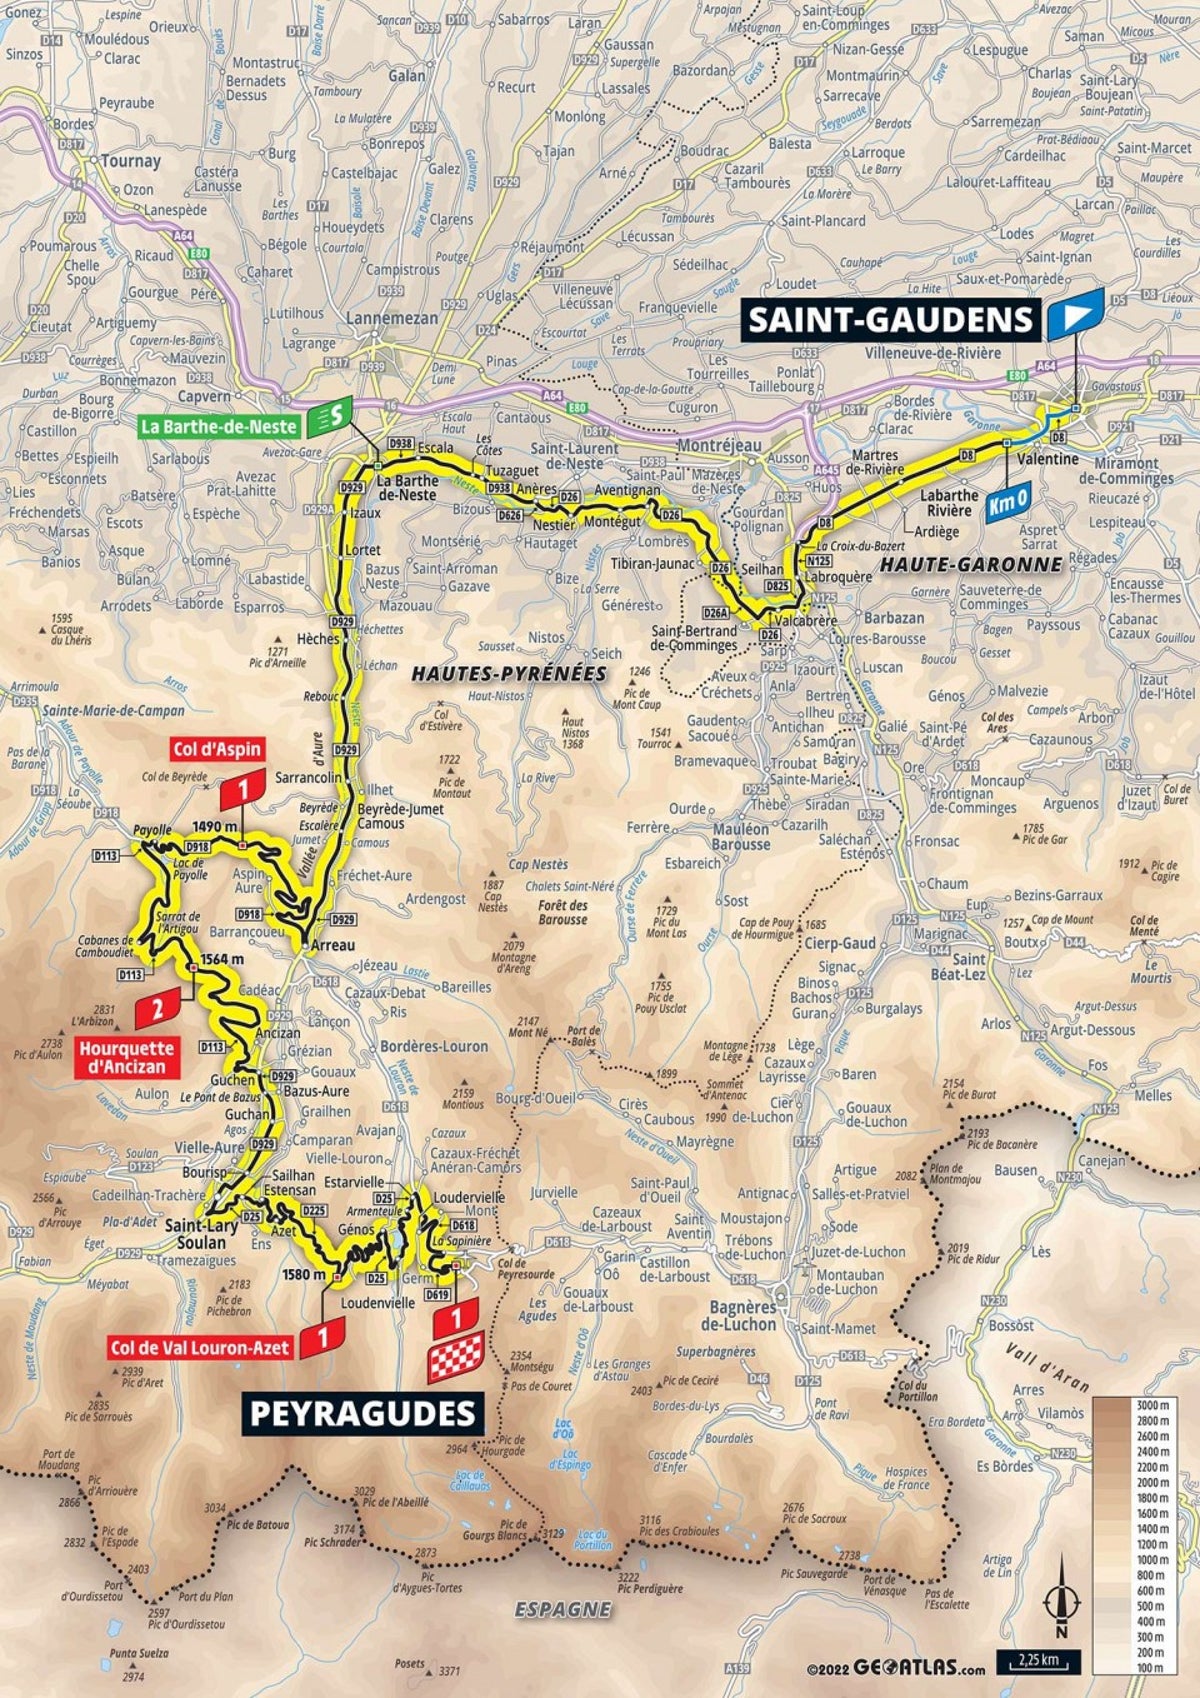 Tour de France 2022 stage 17 preview: Route map and profile of road to Peyragudes today